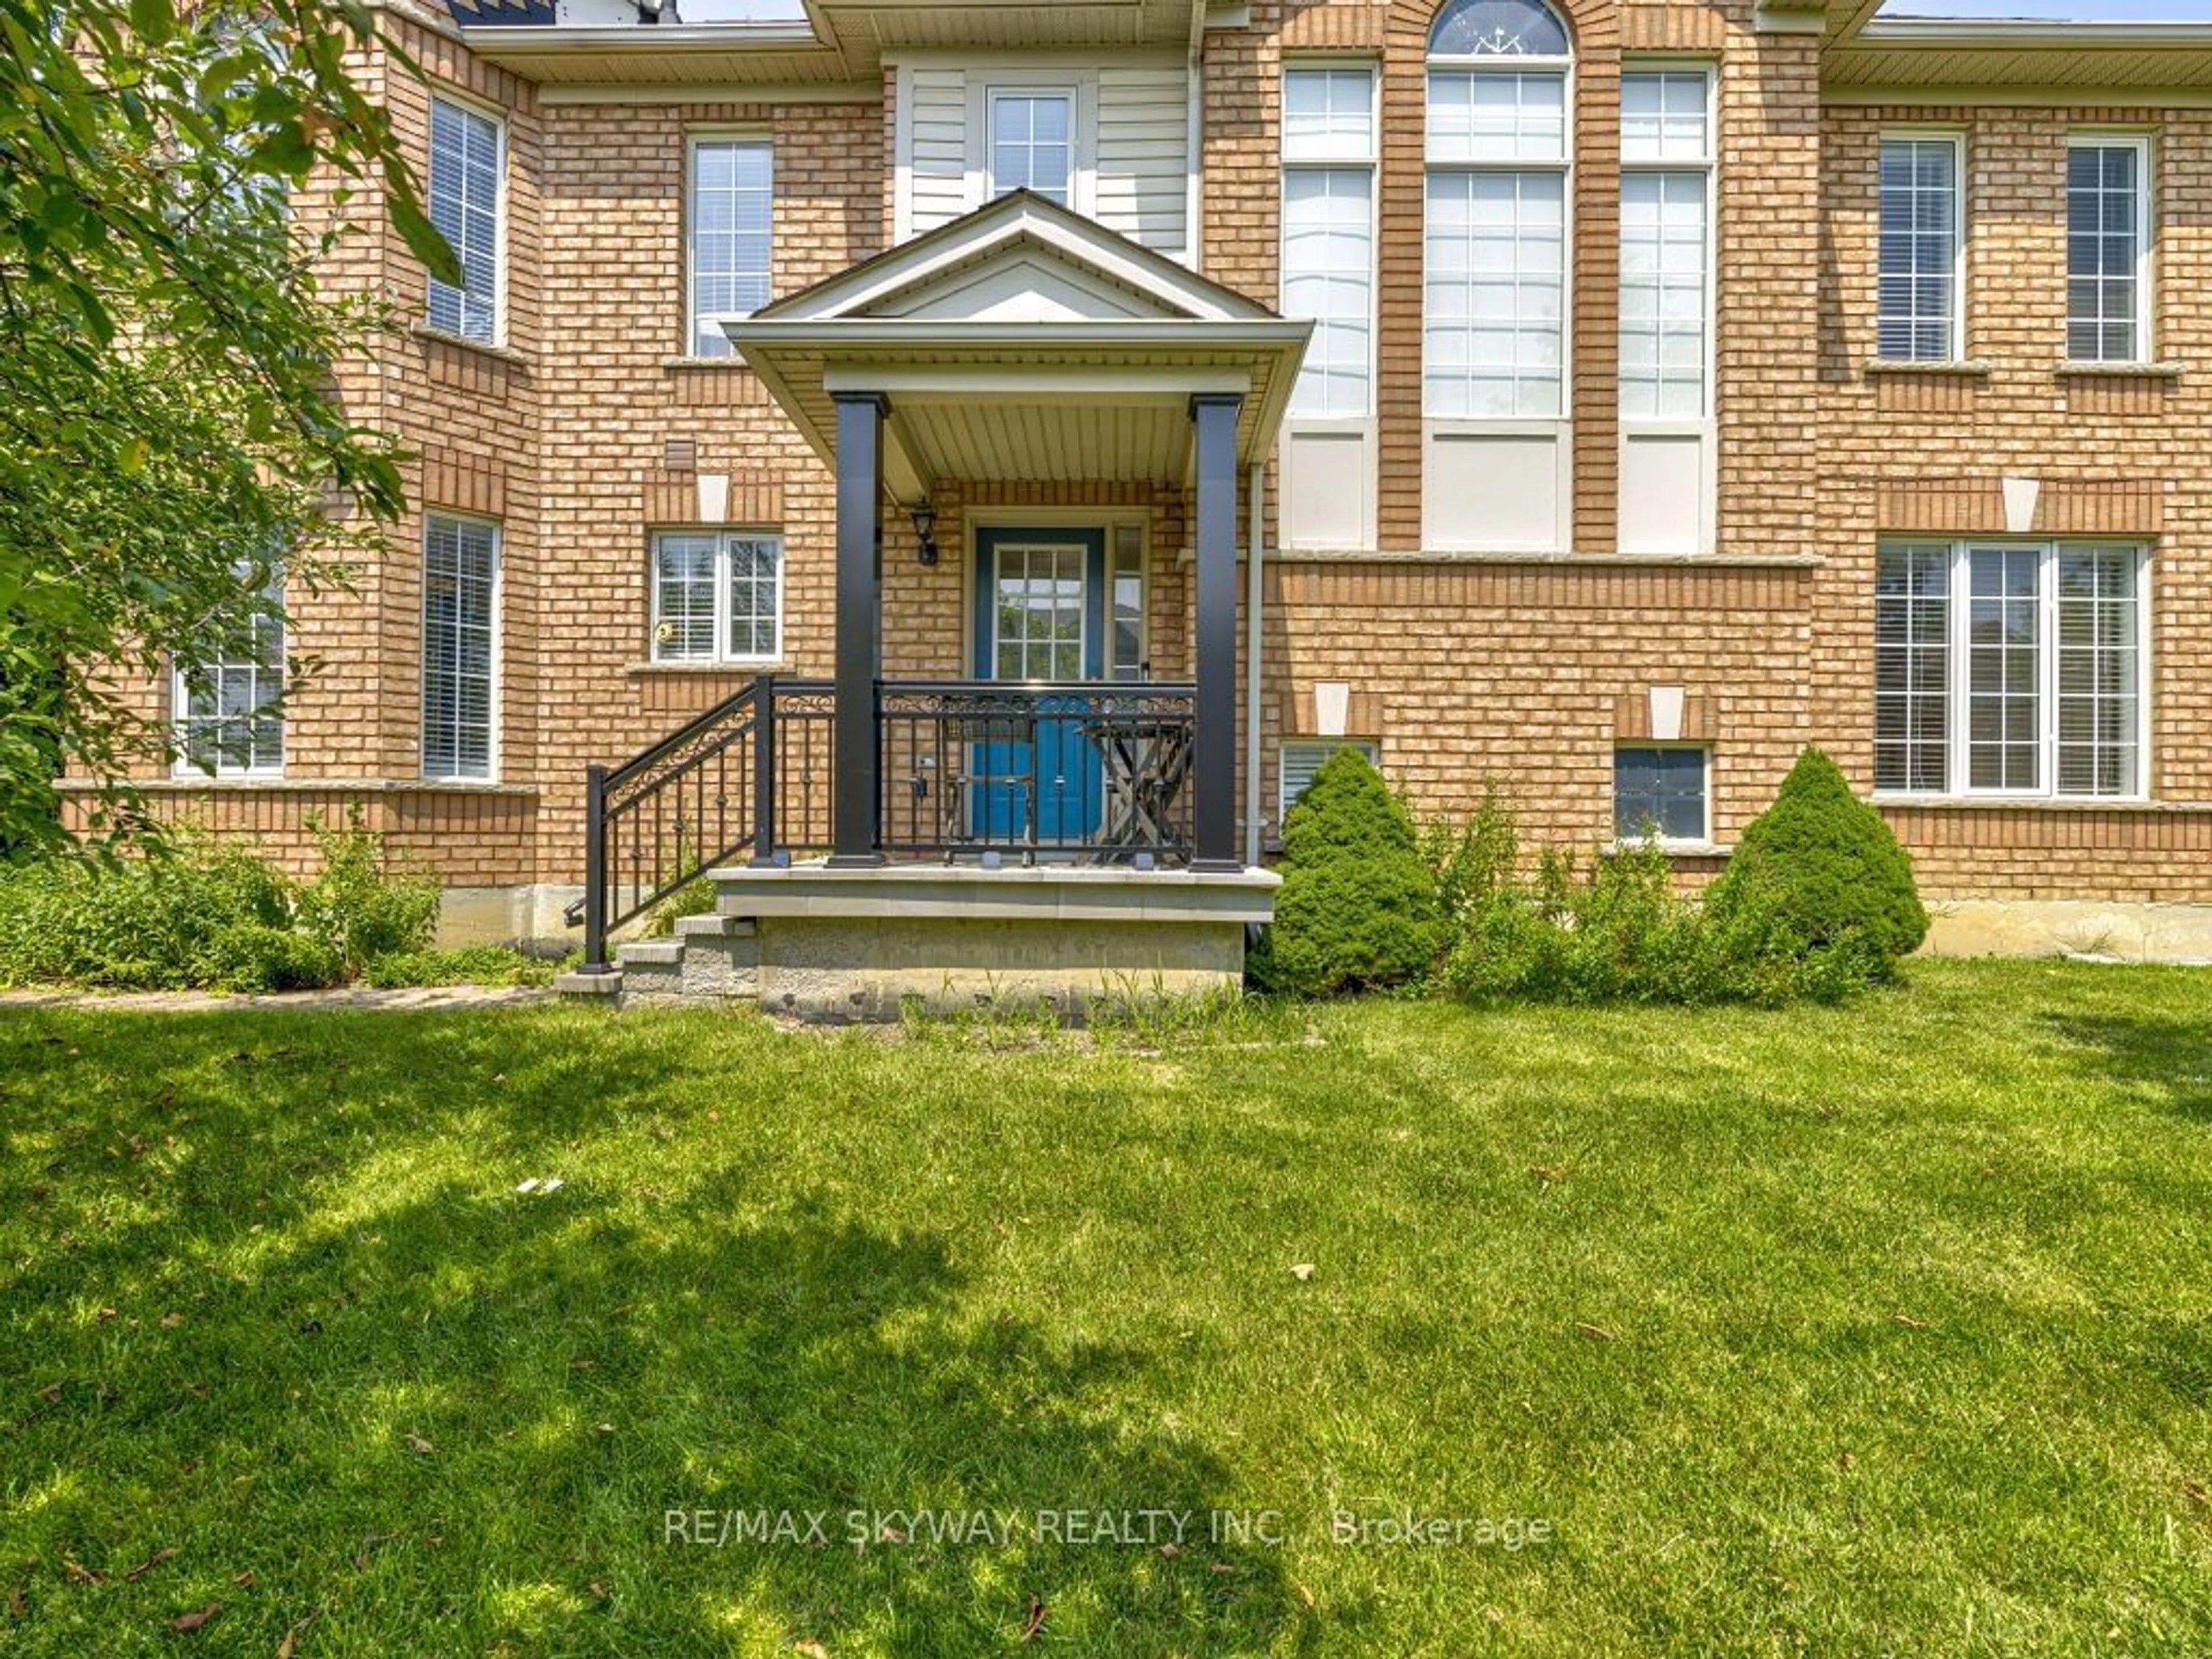 Home with brick exterior material for 3859 Talias Cres, Mississauga Ontario L5M 6L6